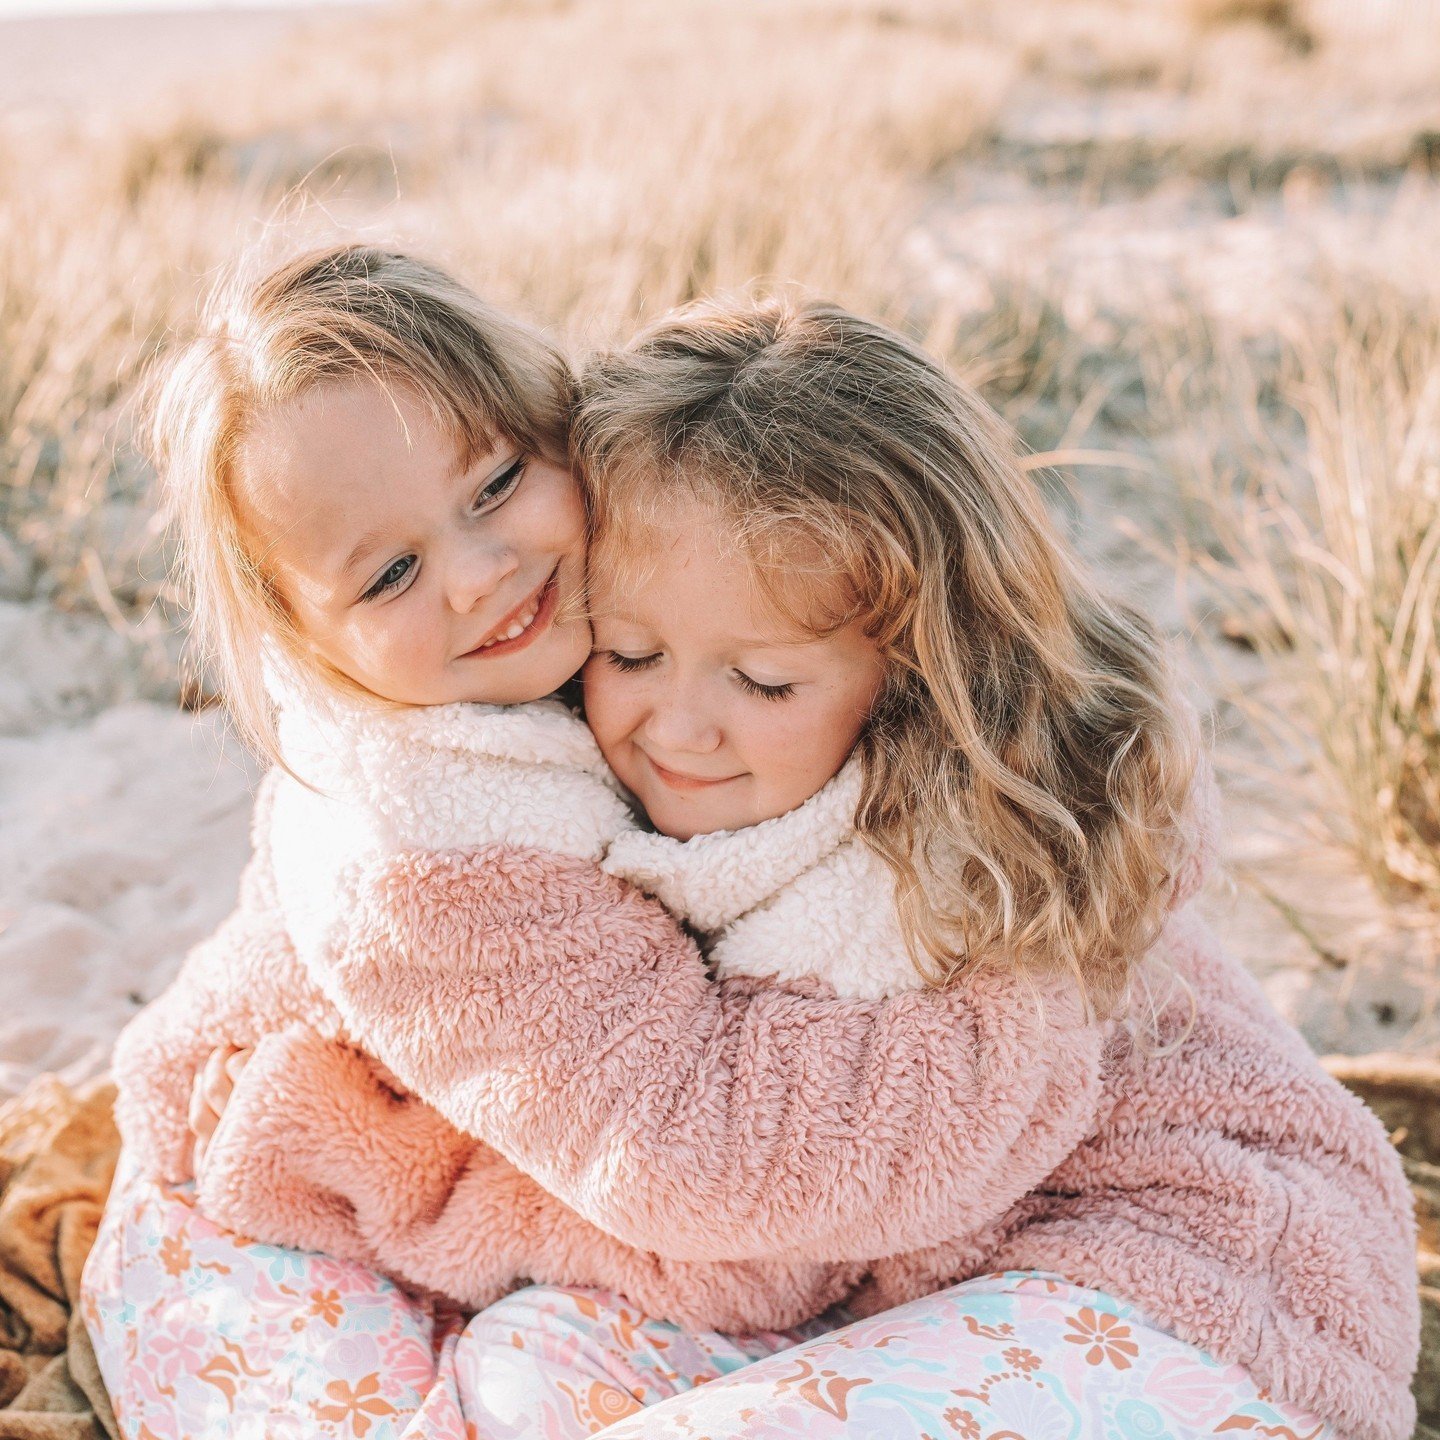 We can't get enough of these two! 🤍 Our teddy fleece pullover's are a must for magical sunset filled evenings at the beach like these...✨️Get yours at a Target near you! 🩷⁠
⁠
⁠
⁠
#pipinghot #forcleanoceans #heroesfortheocean #australiansurf #sustai